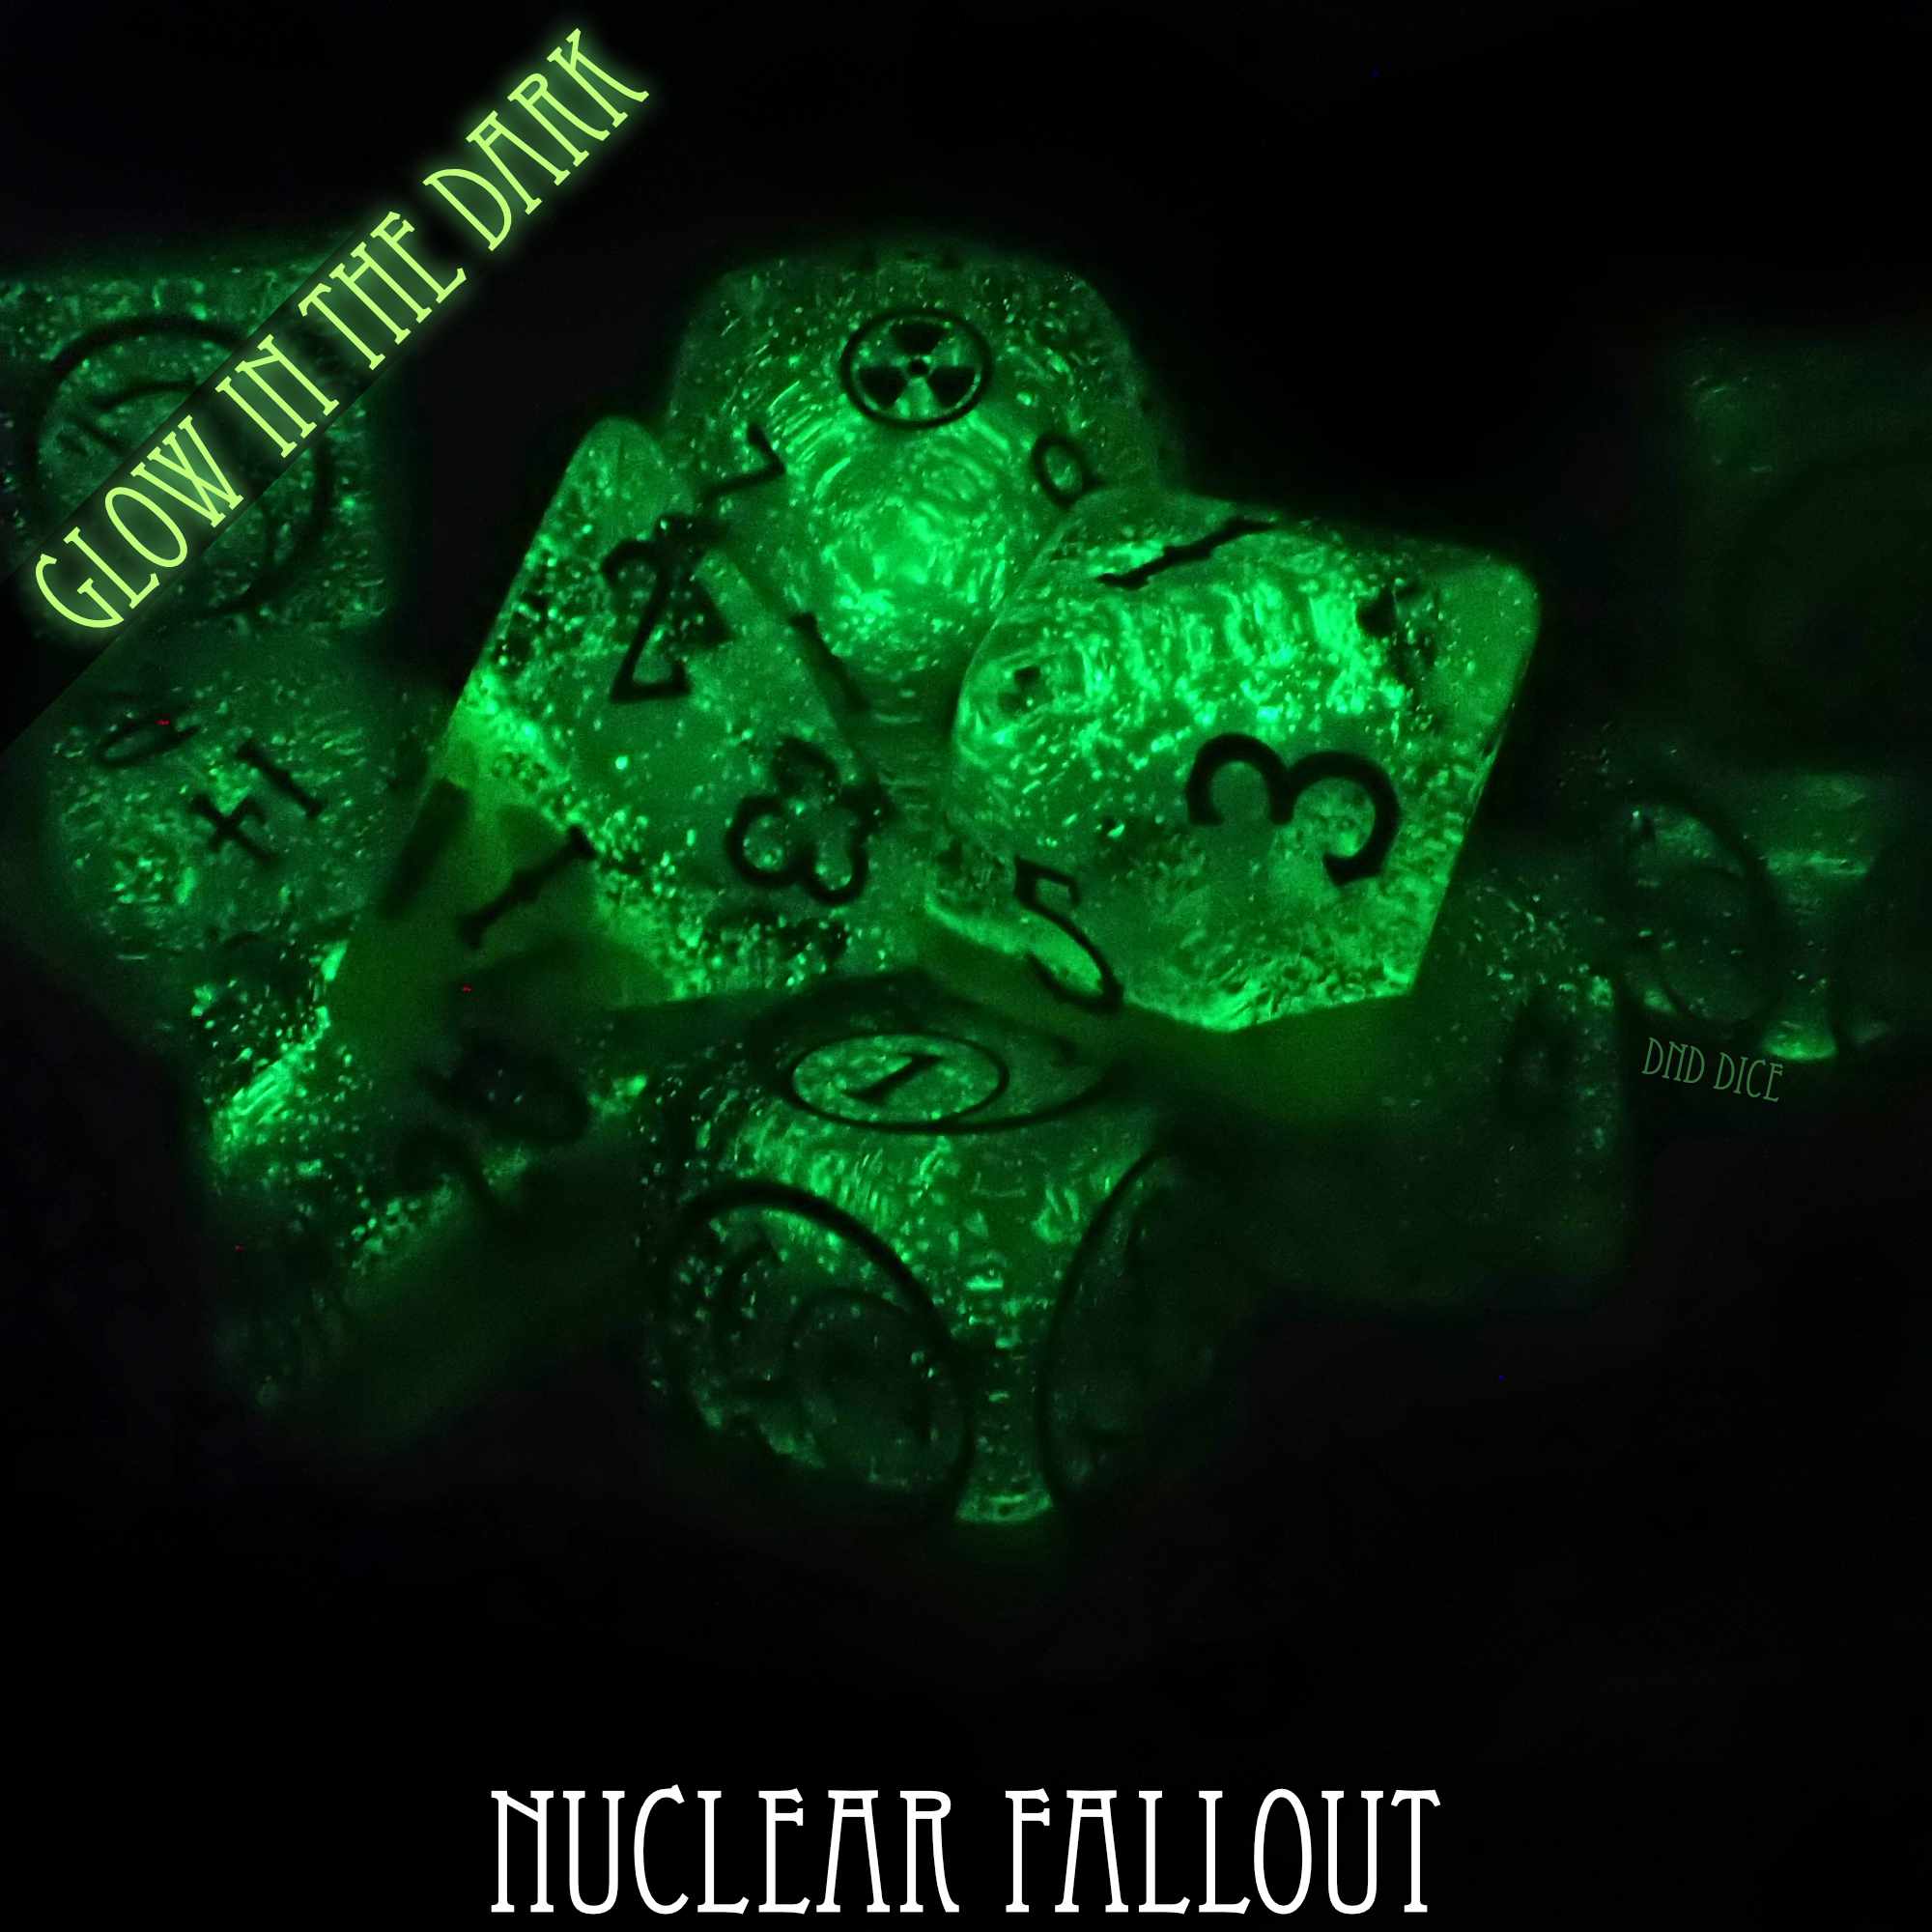 Nuclear Fallout - 11 Dice Set (Glow)